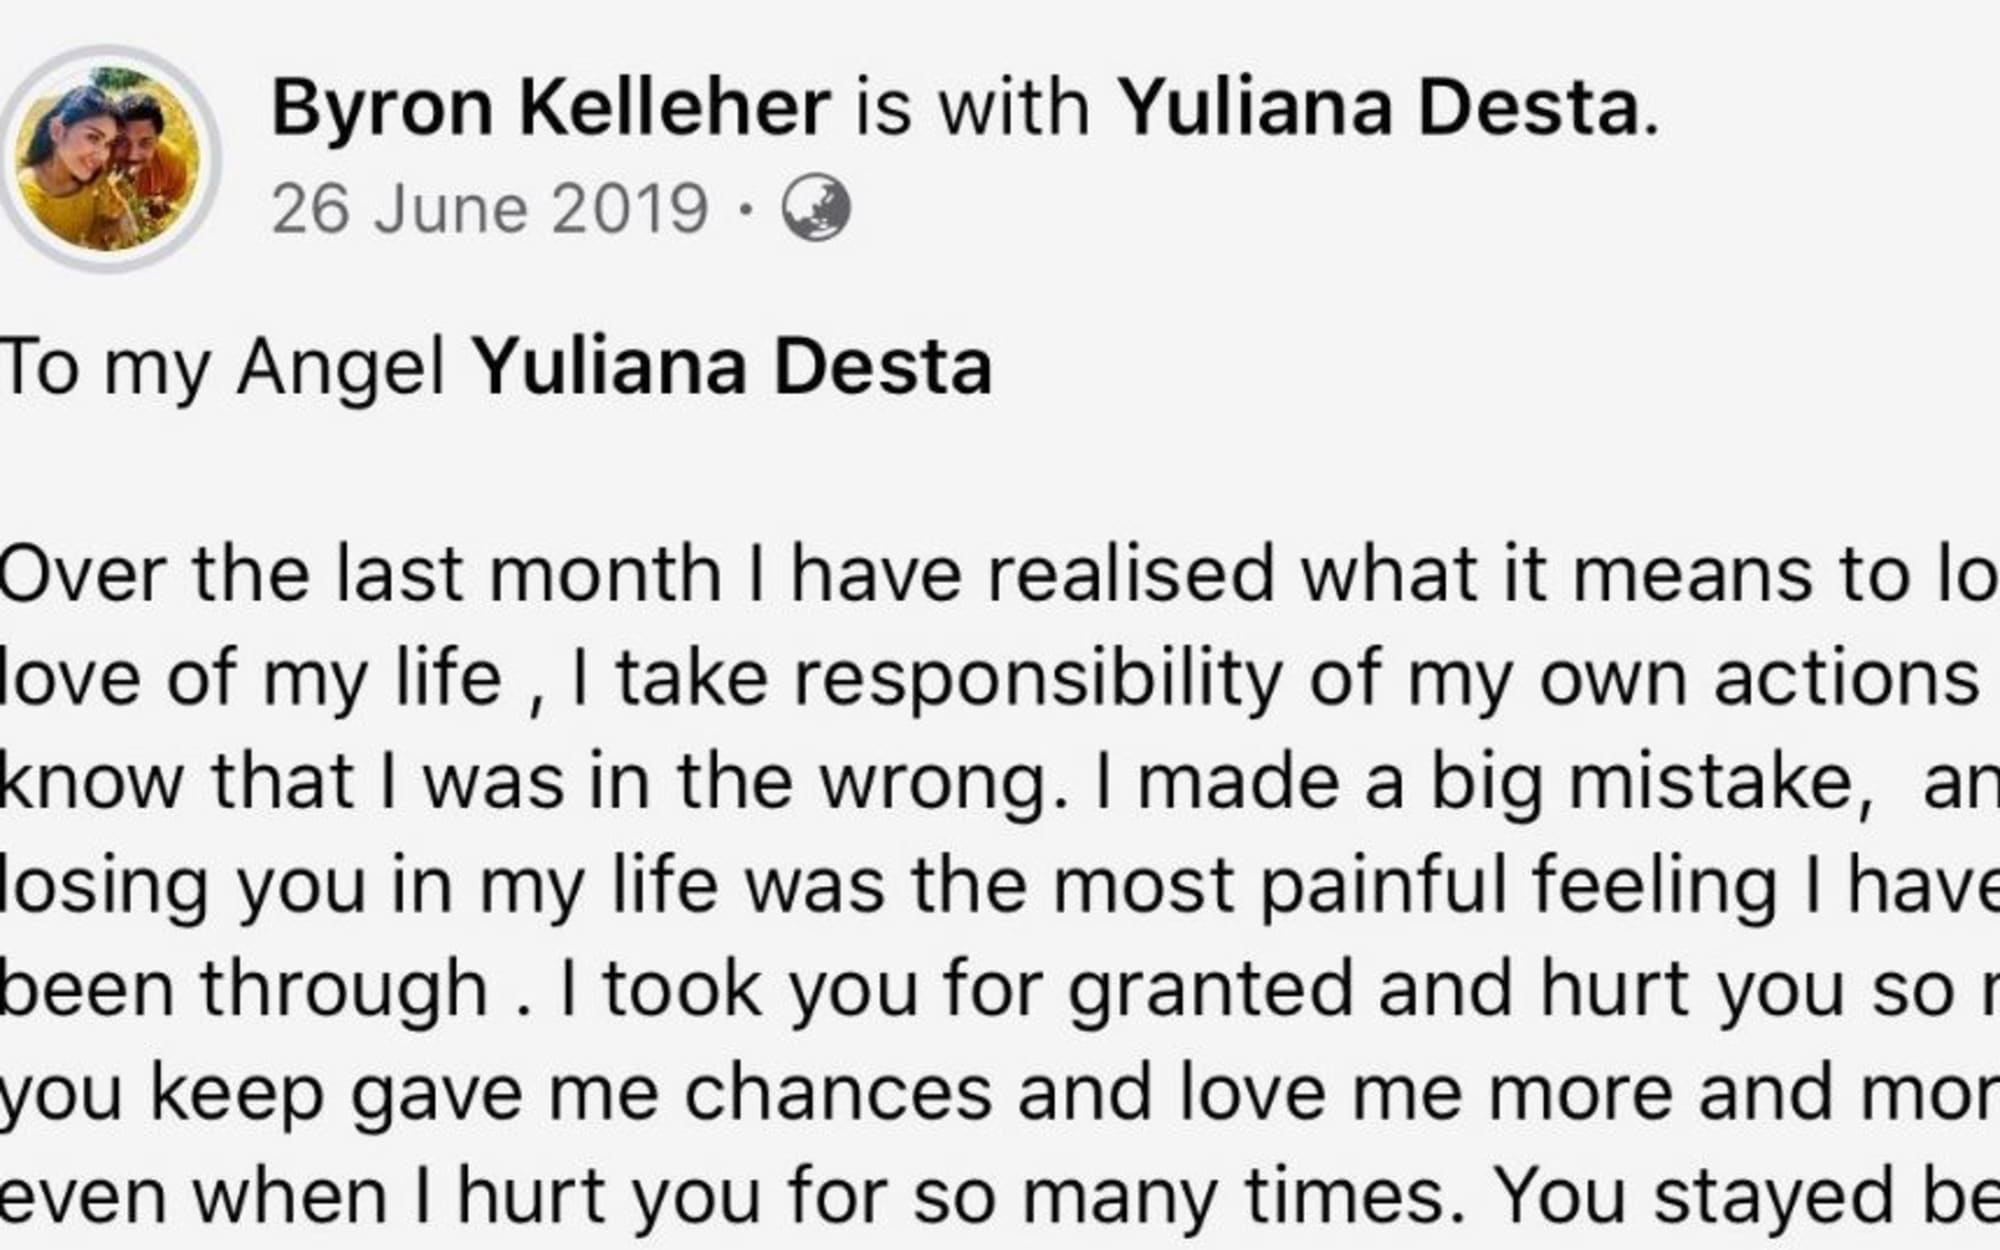 A public Facebook post ex-All Black Byron Kelleher published in 2019 expressing contrition to his then partner Yuliana Desta after what she says was another episode of drunken violence against her.